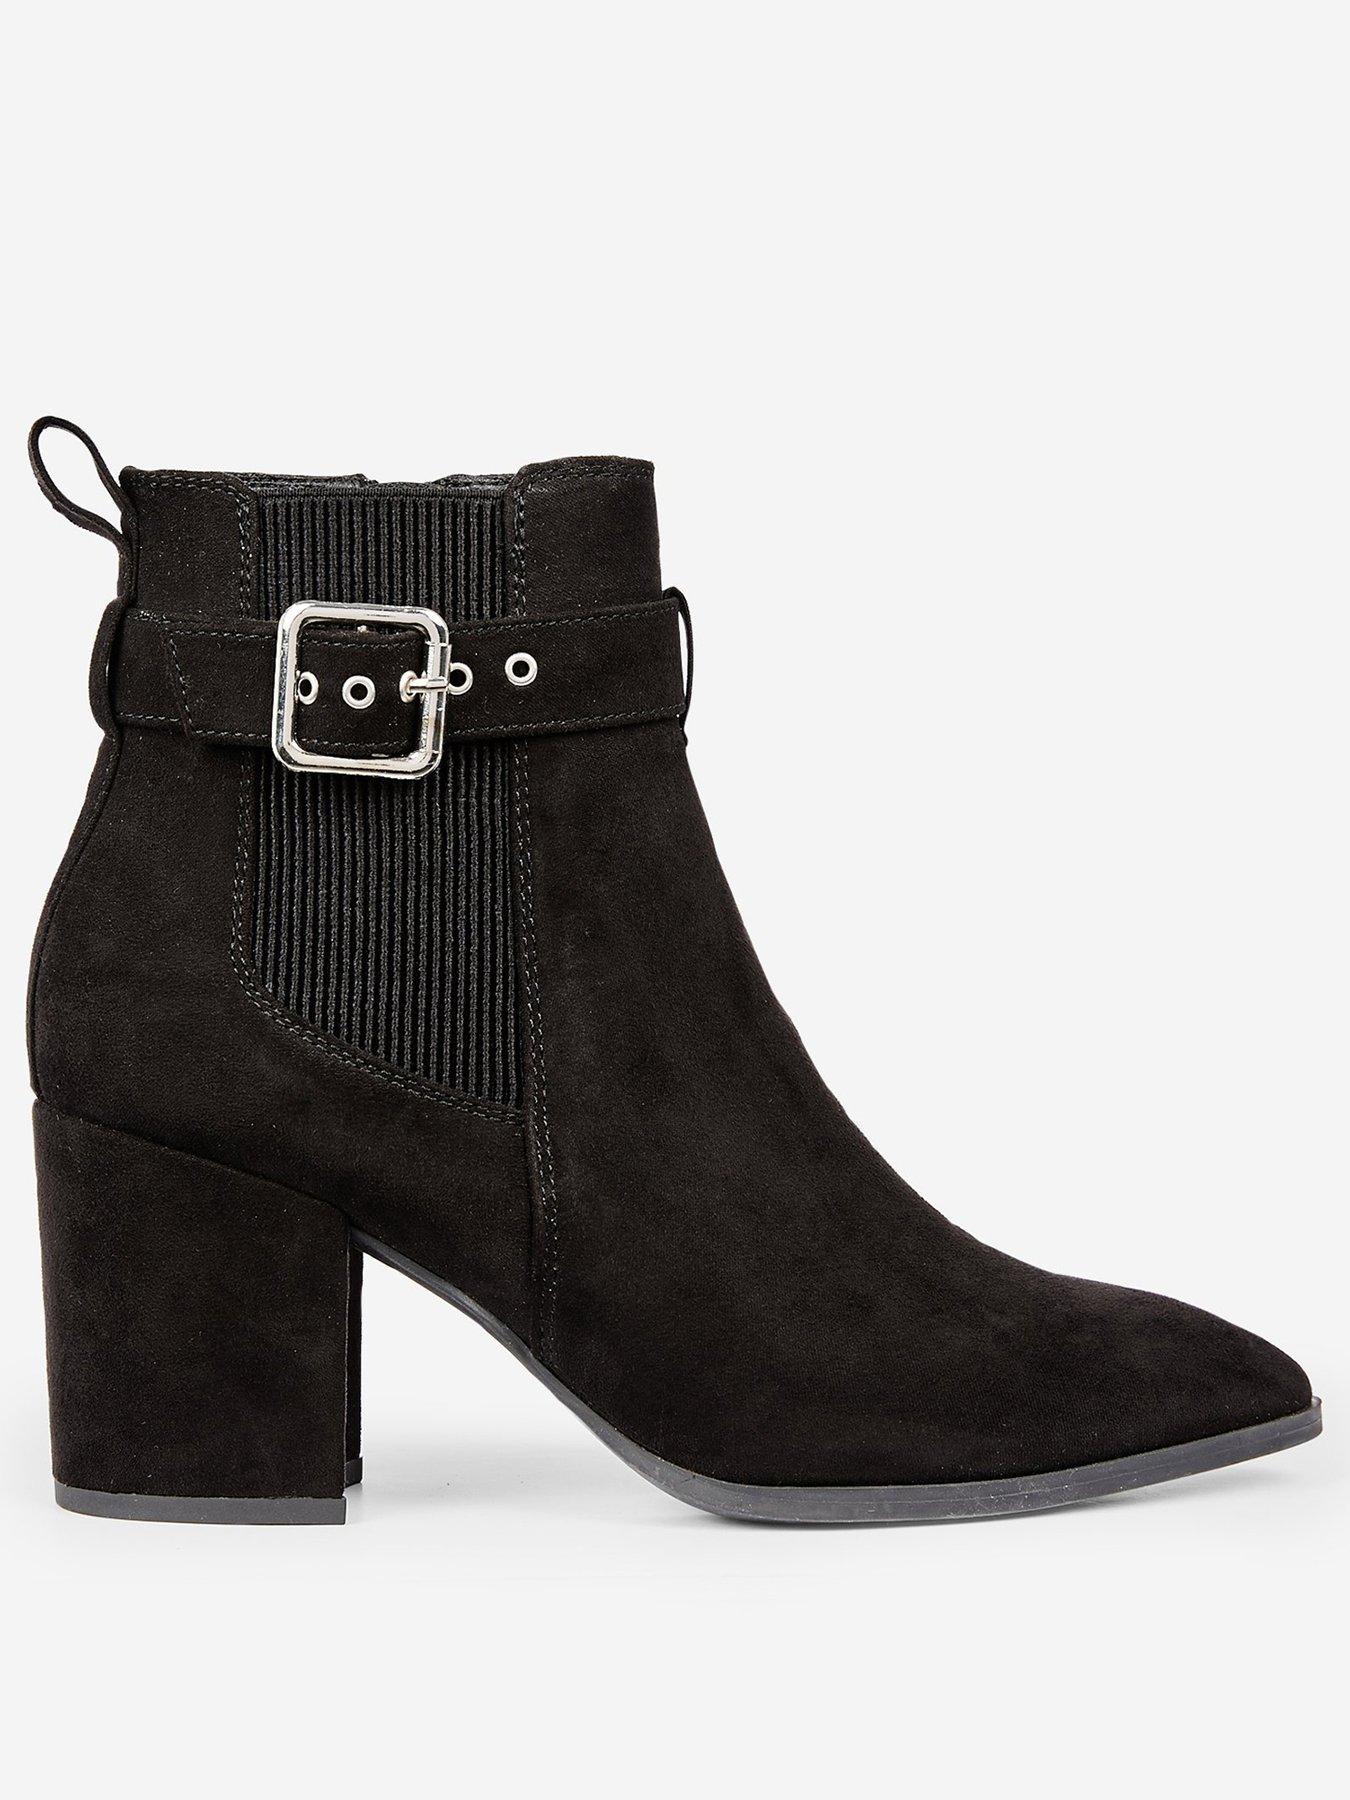 dorothy perkins black suede ankle boots